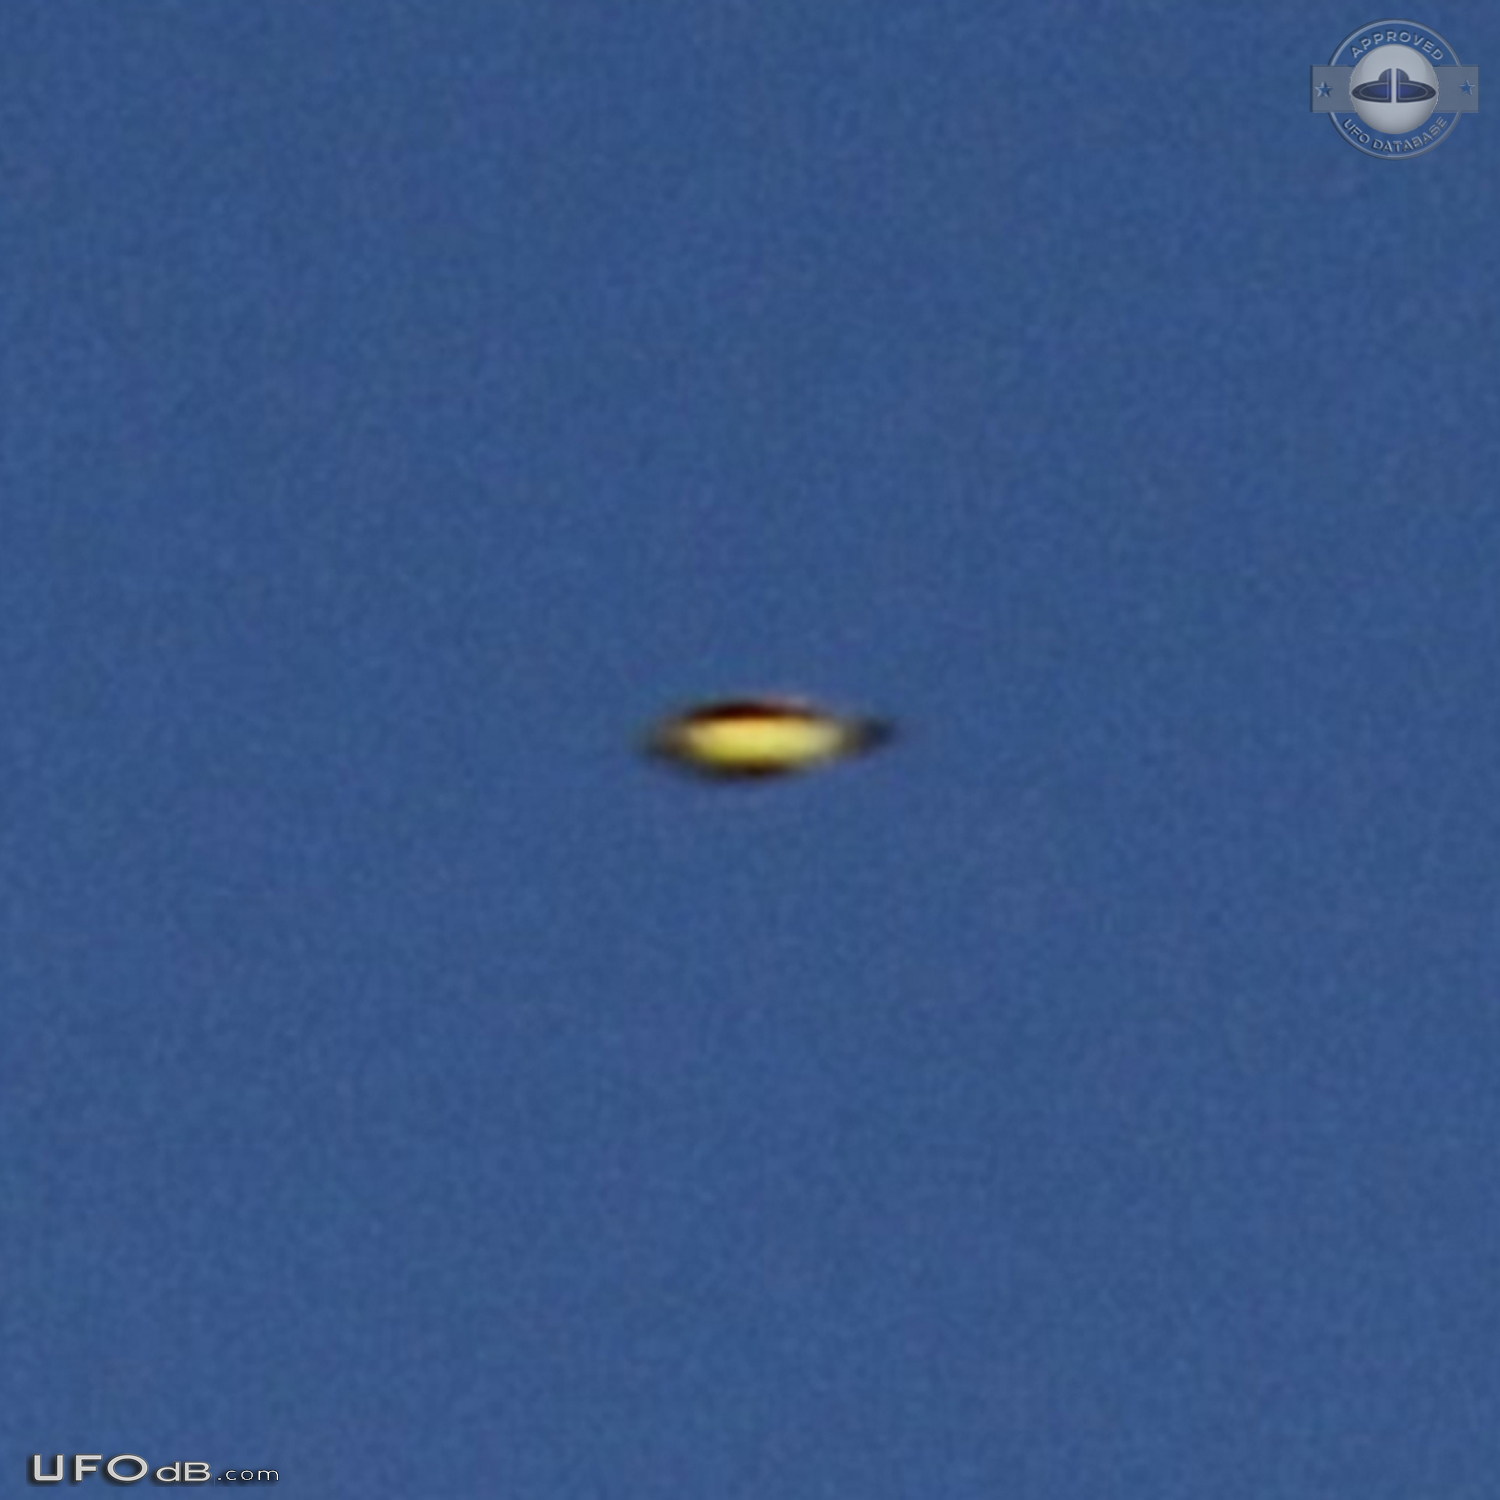 UFO Expert Captures Close Encounter With Disk-Shaped UFO 2015 UFO Picture #684-2